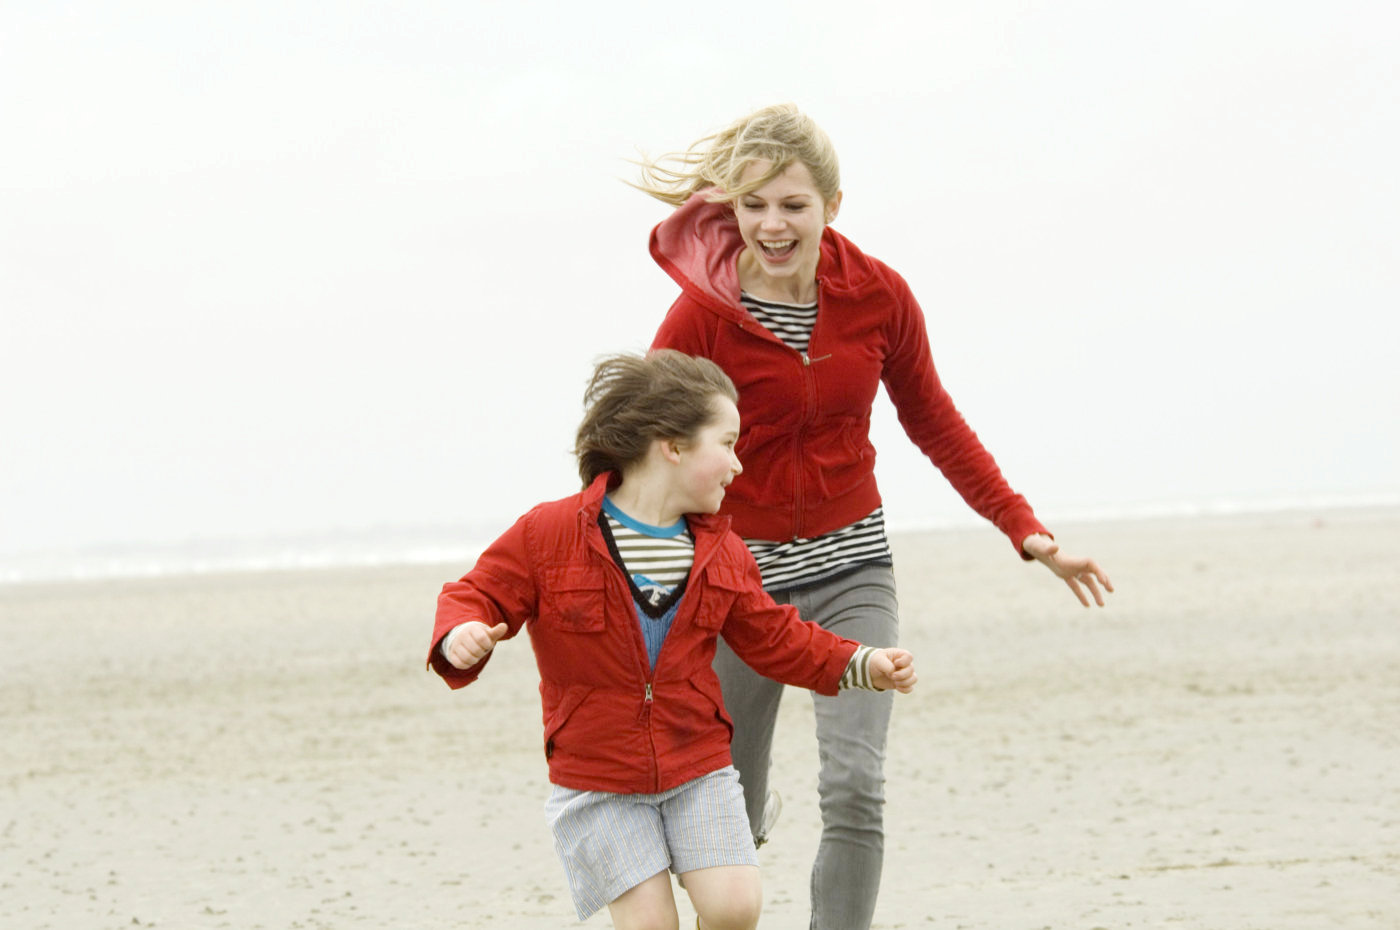 Sidney Johnston stars as The Boy and Michelle Williams stars as Young Mother in Aramid Entertainment Fund's Incendiary (2008)